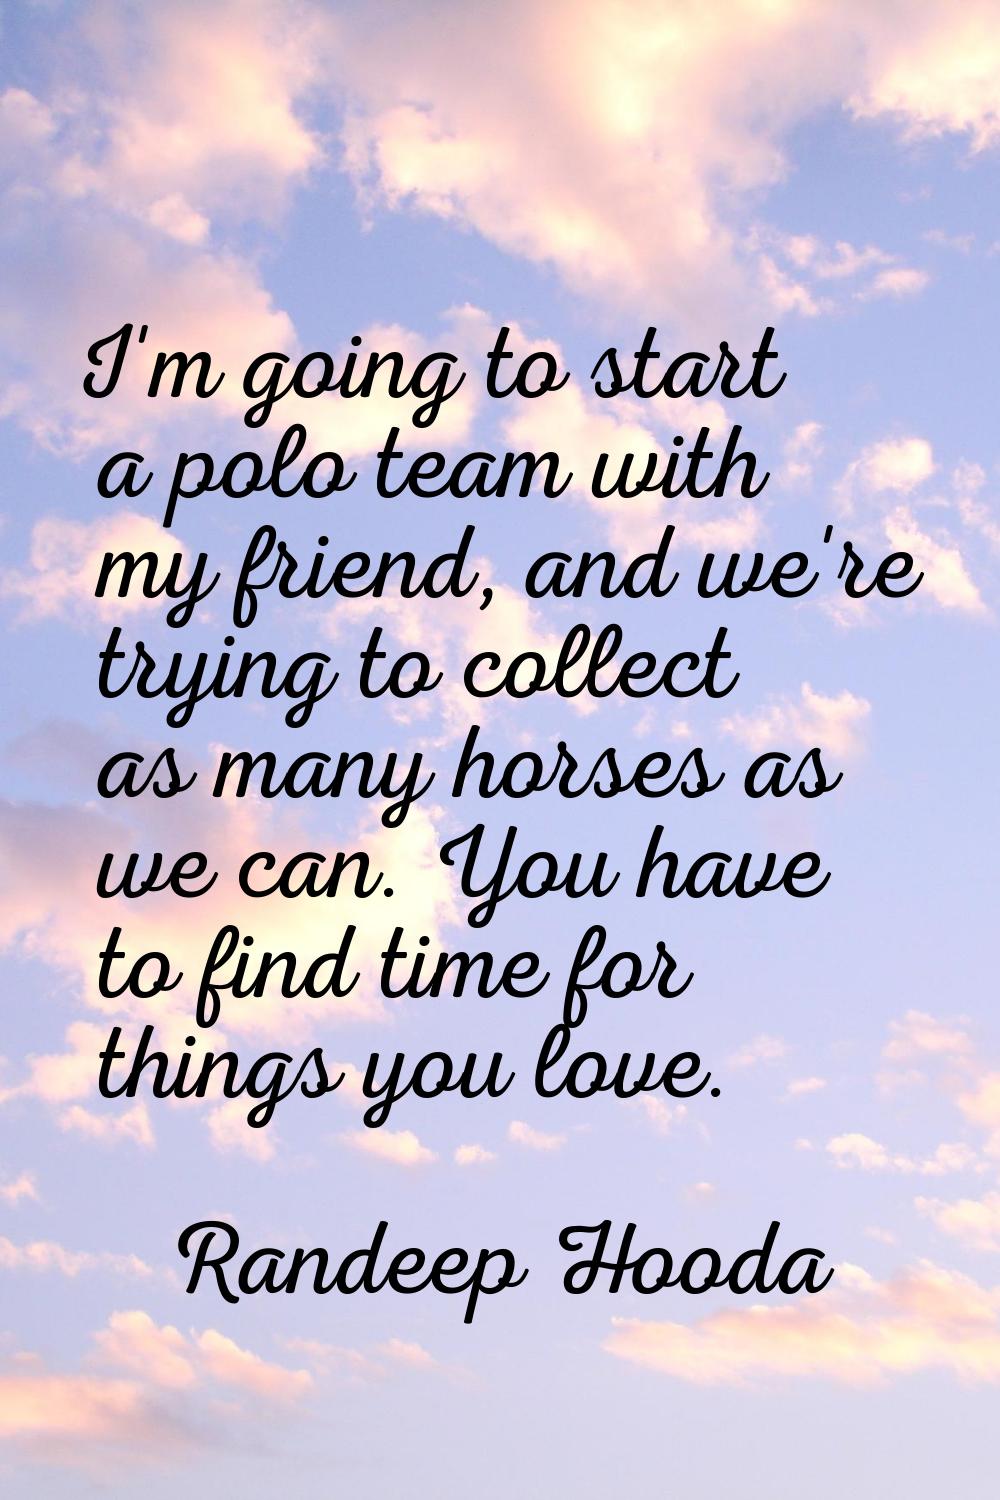 I'm going to start a polo team with my friend, and we're trying to collect as many horses as we can